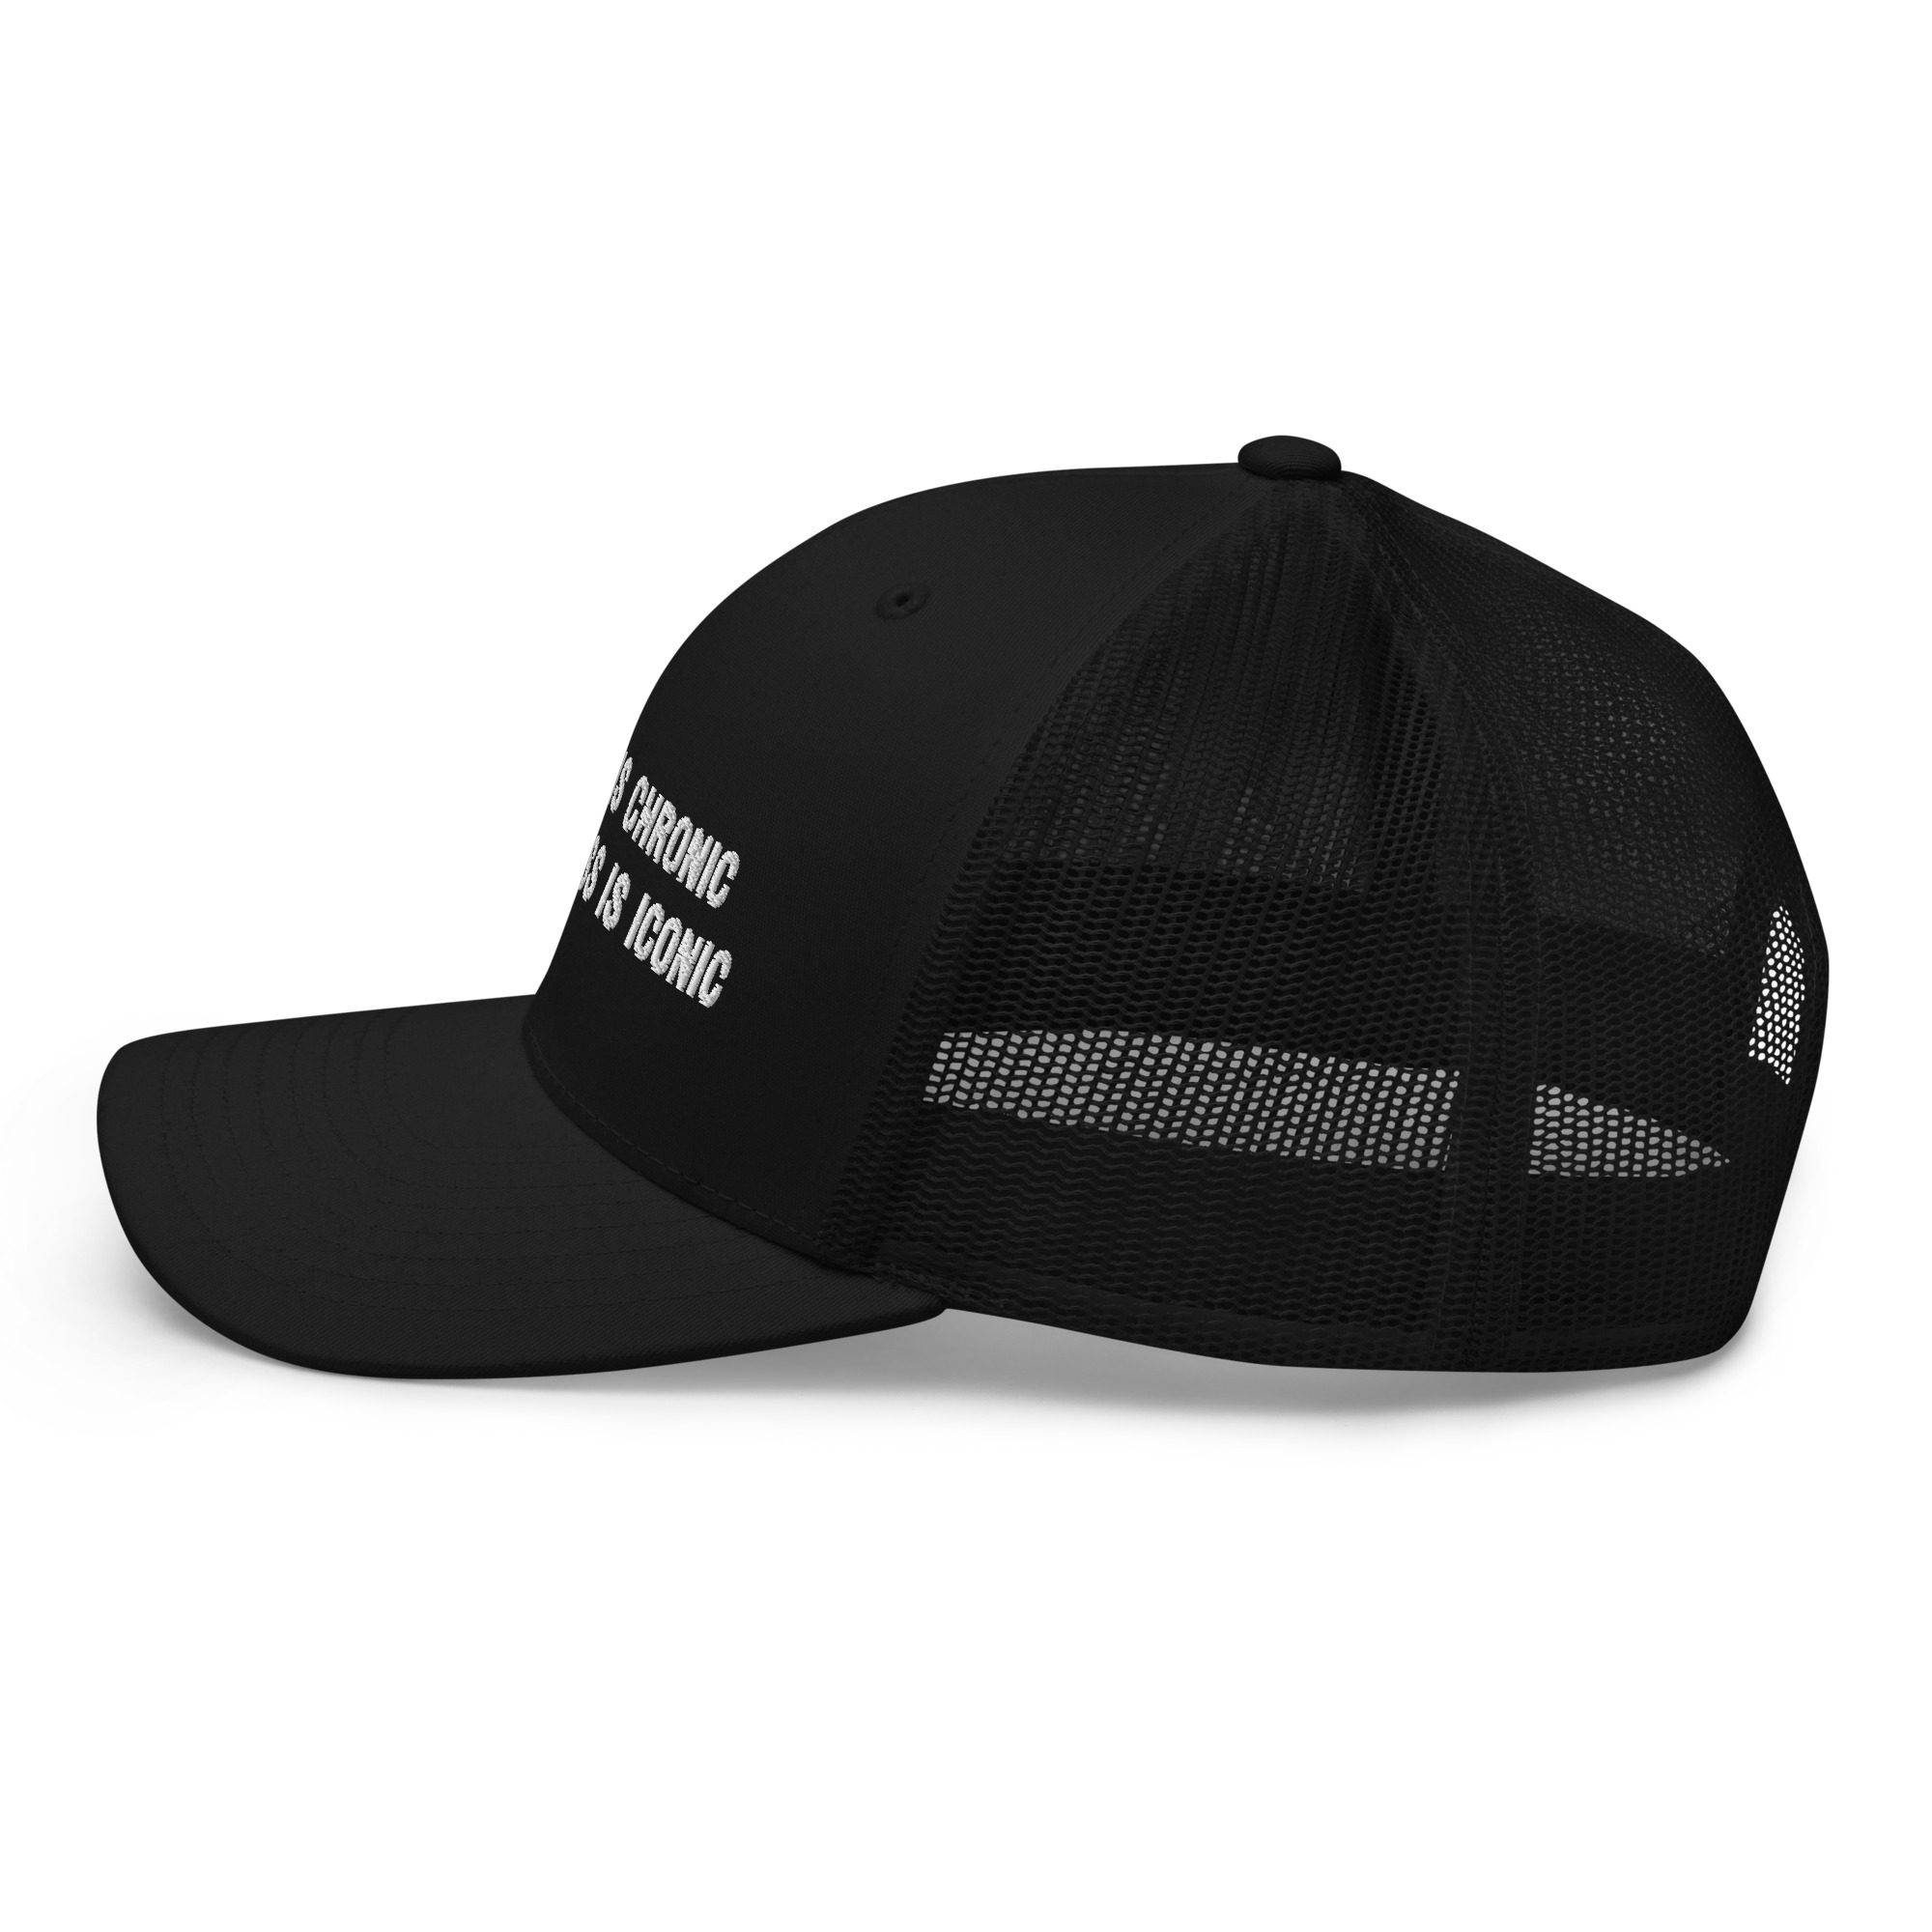 My ADHD Is Chronic But This Ass Is Iconic Trucker Cap